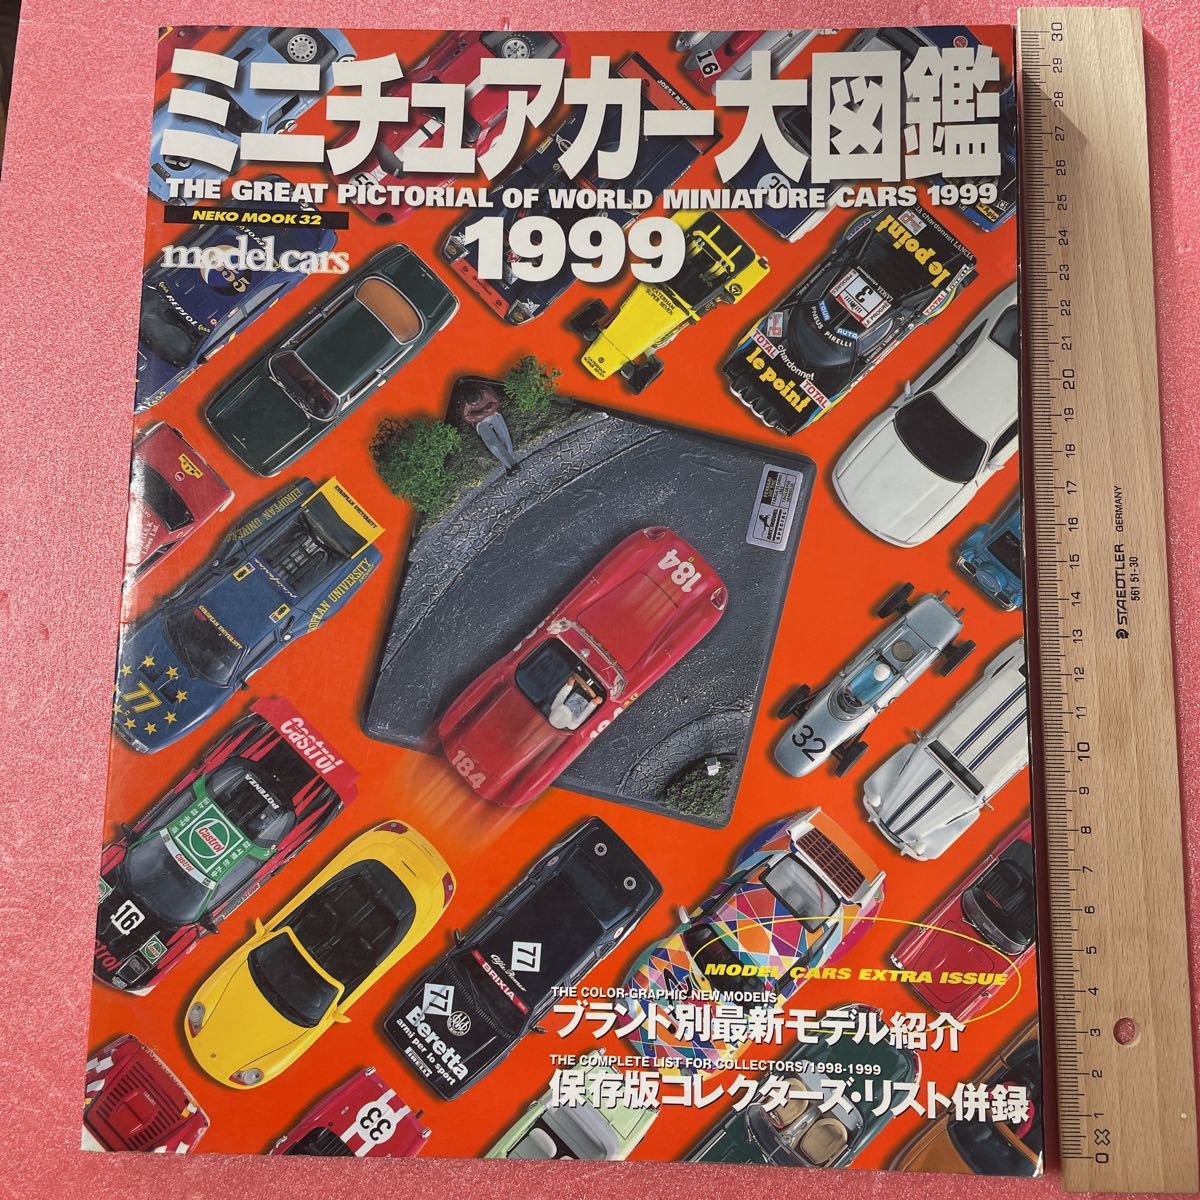 K1-142 送料込 【ミーチュアカー大図鑑 THE GREAT PICTORIAL OF WORLD COLLECTORS/1998-1999 保存版コレクターズ・リスト併録_画像1